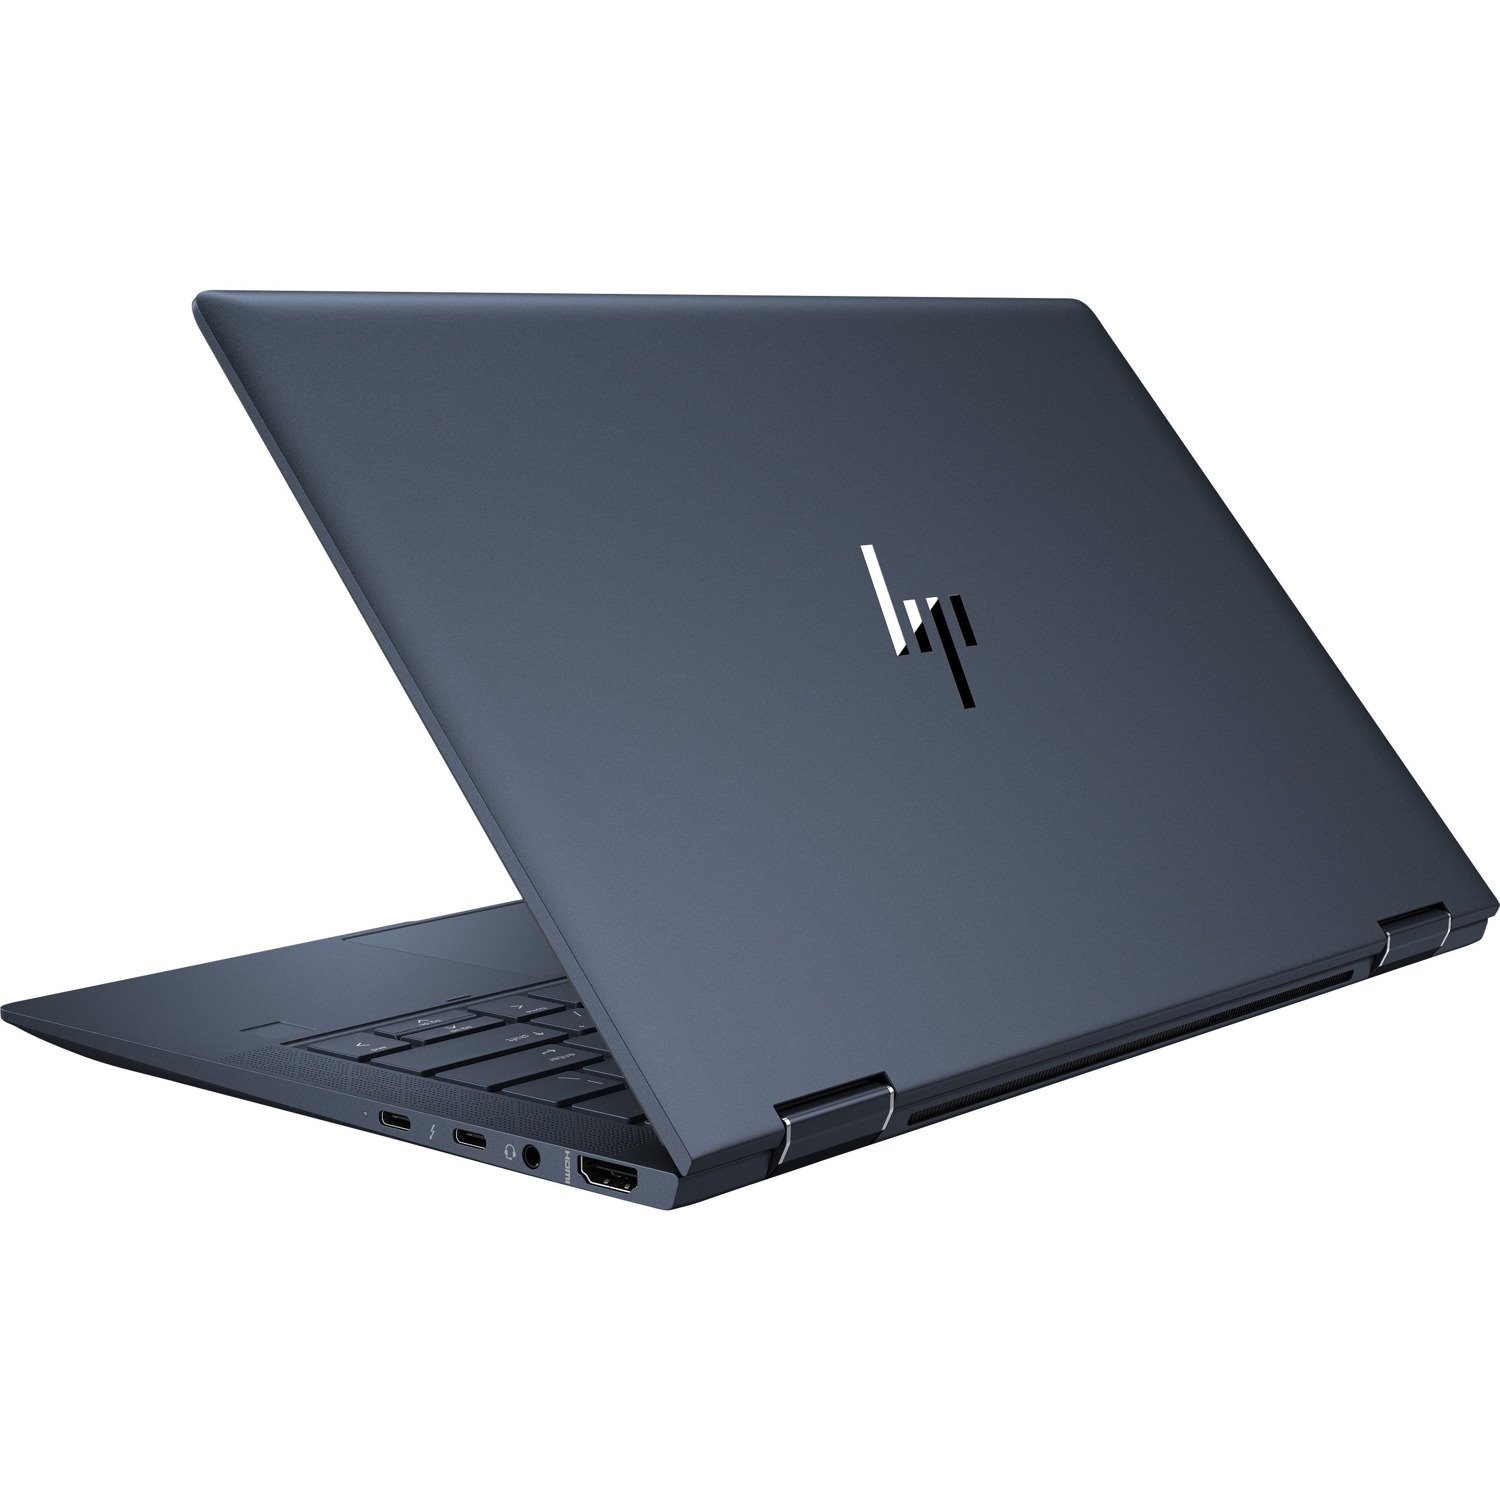 HP Elite Dragonfly G2 13.3" Touchscreen Convertible 2 in 1 Notebook - Full HD - 1920 x 1080 - Intel Core i7 11th Gen i7-1185G7 Quad-core (4 Core) 3 GHz - 16 GB Total RAM - 512 GB SSD